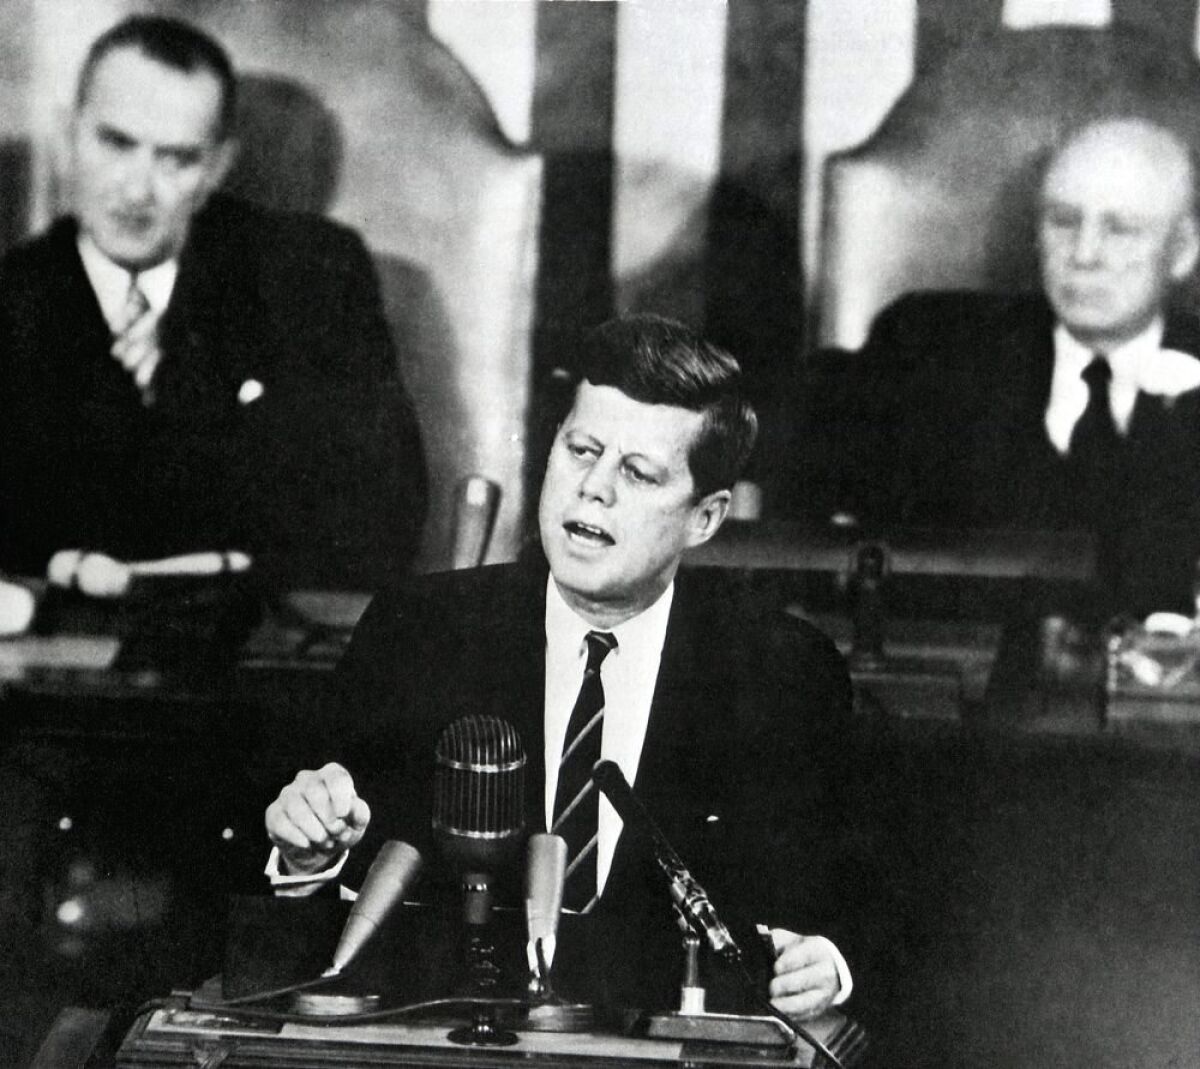 Nov. 22 marks the 50th anniversary of John F. Kennedy's assassination at Dealey Plaza in Dallas, Texas.